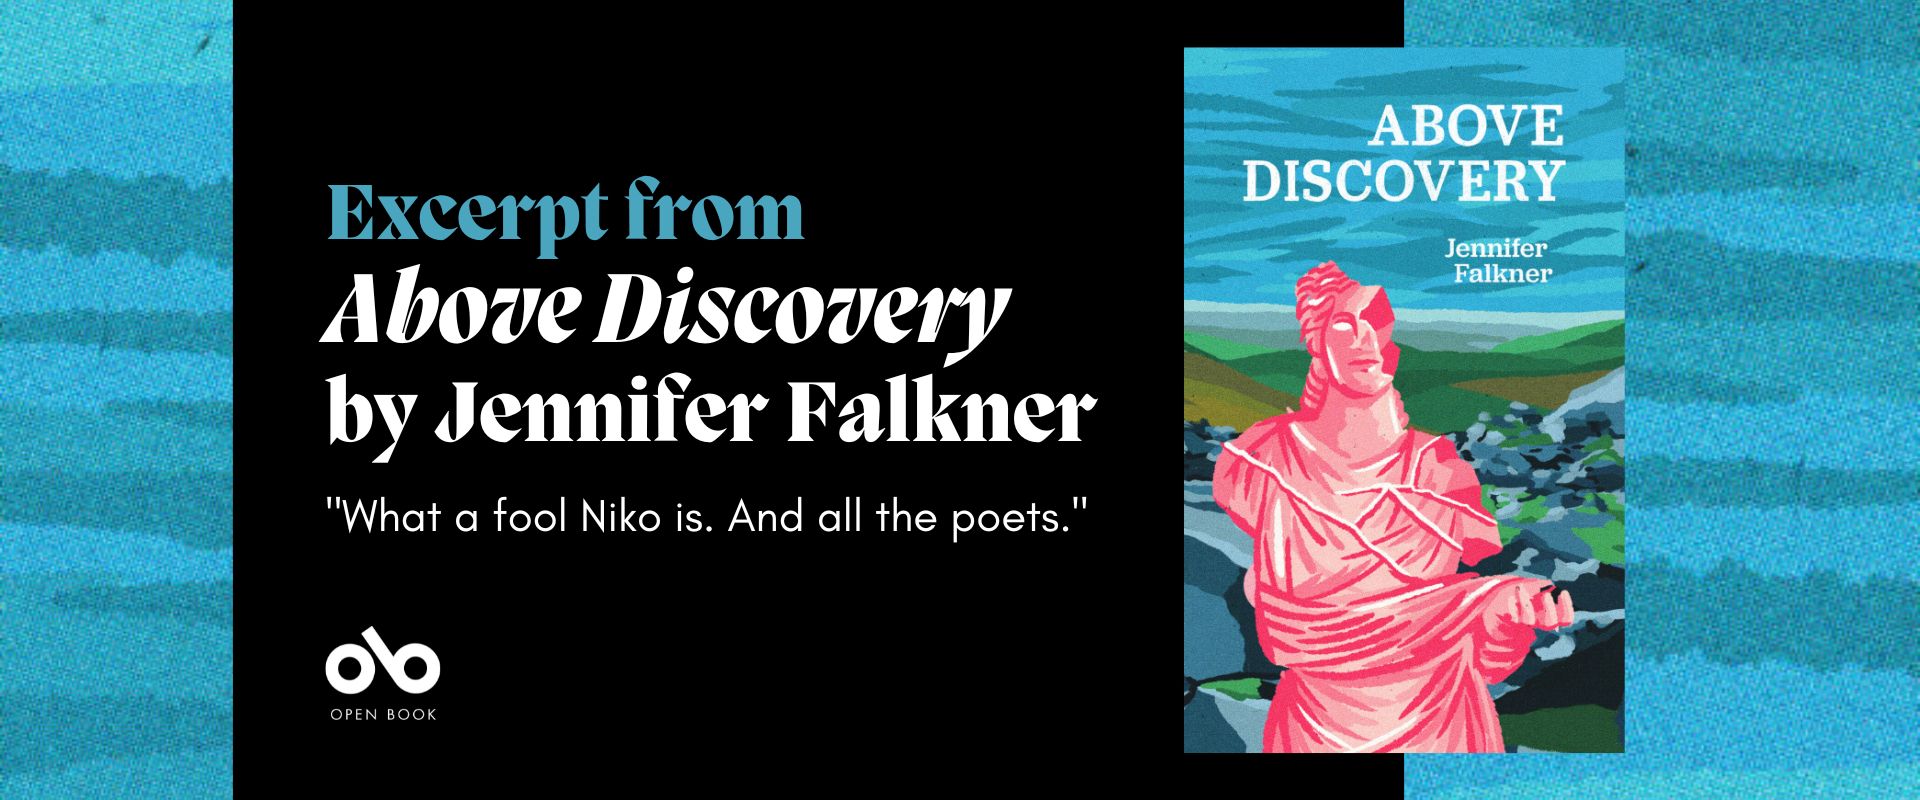 Banner image with text reading "Excerpt from Above Discovery by Jennifer Falkner" and "What a fool Nico is. And all the poets". On the right side is an image of Jennifer Falkner's book, Above Discovery. The right and left background are the same blue as the top of the book cover. The background behind the text is solid black.